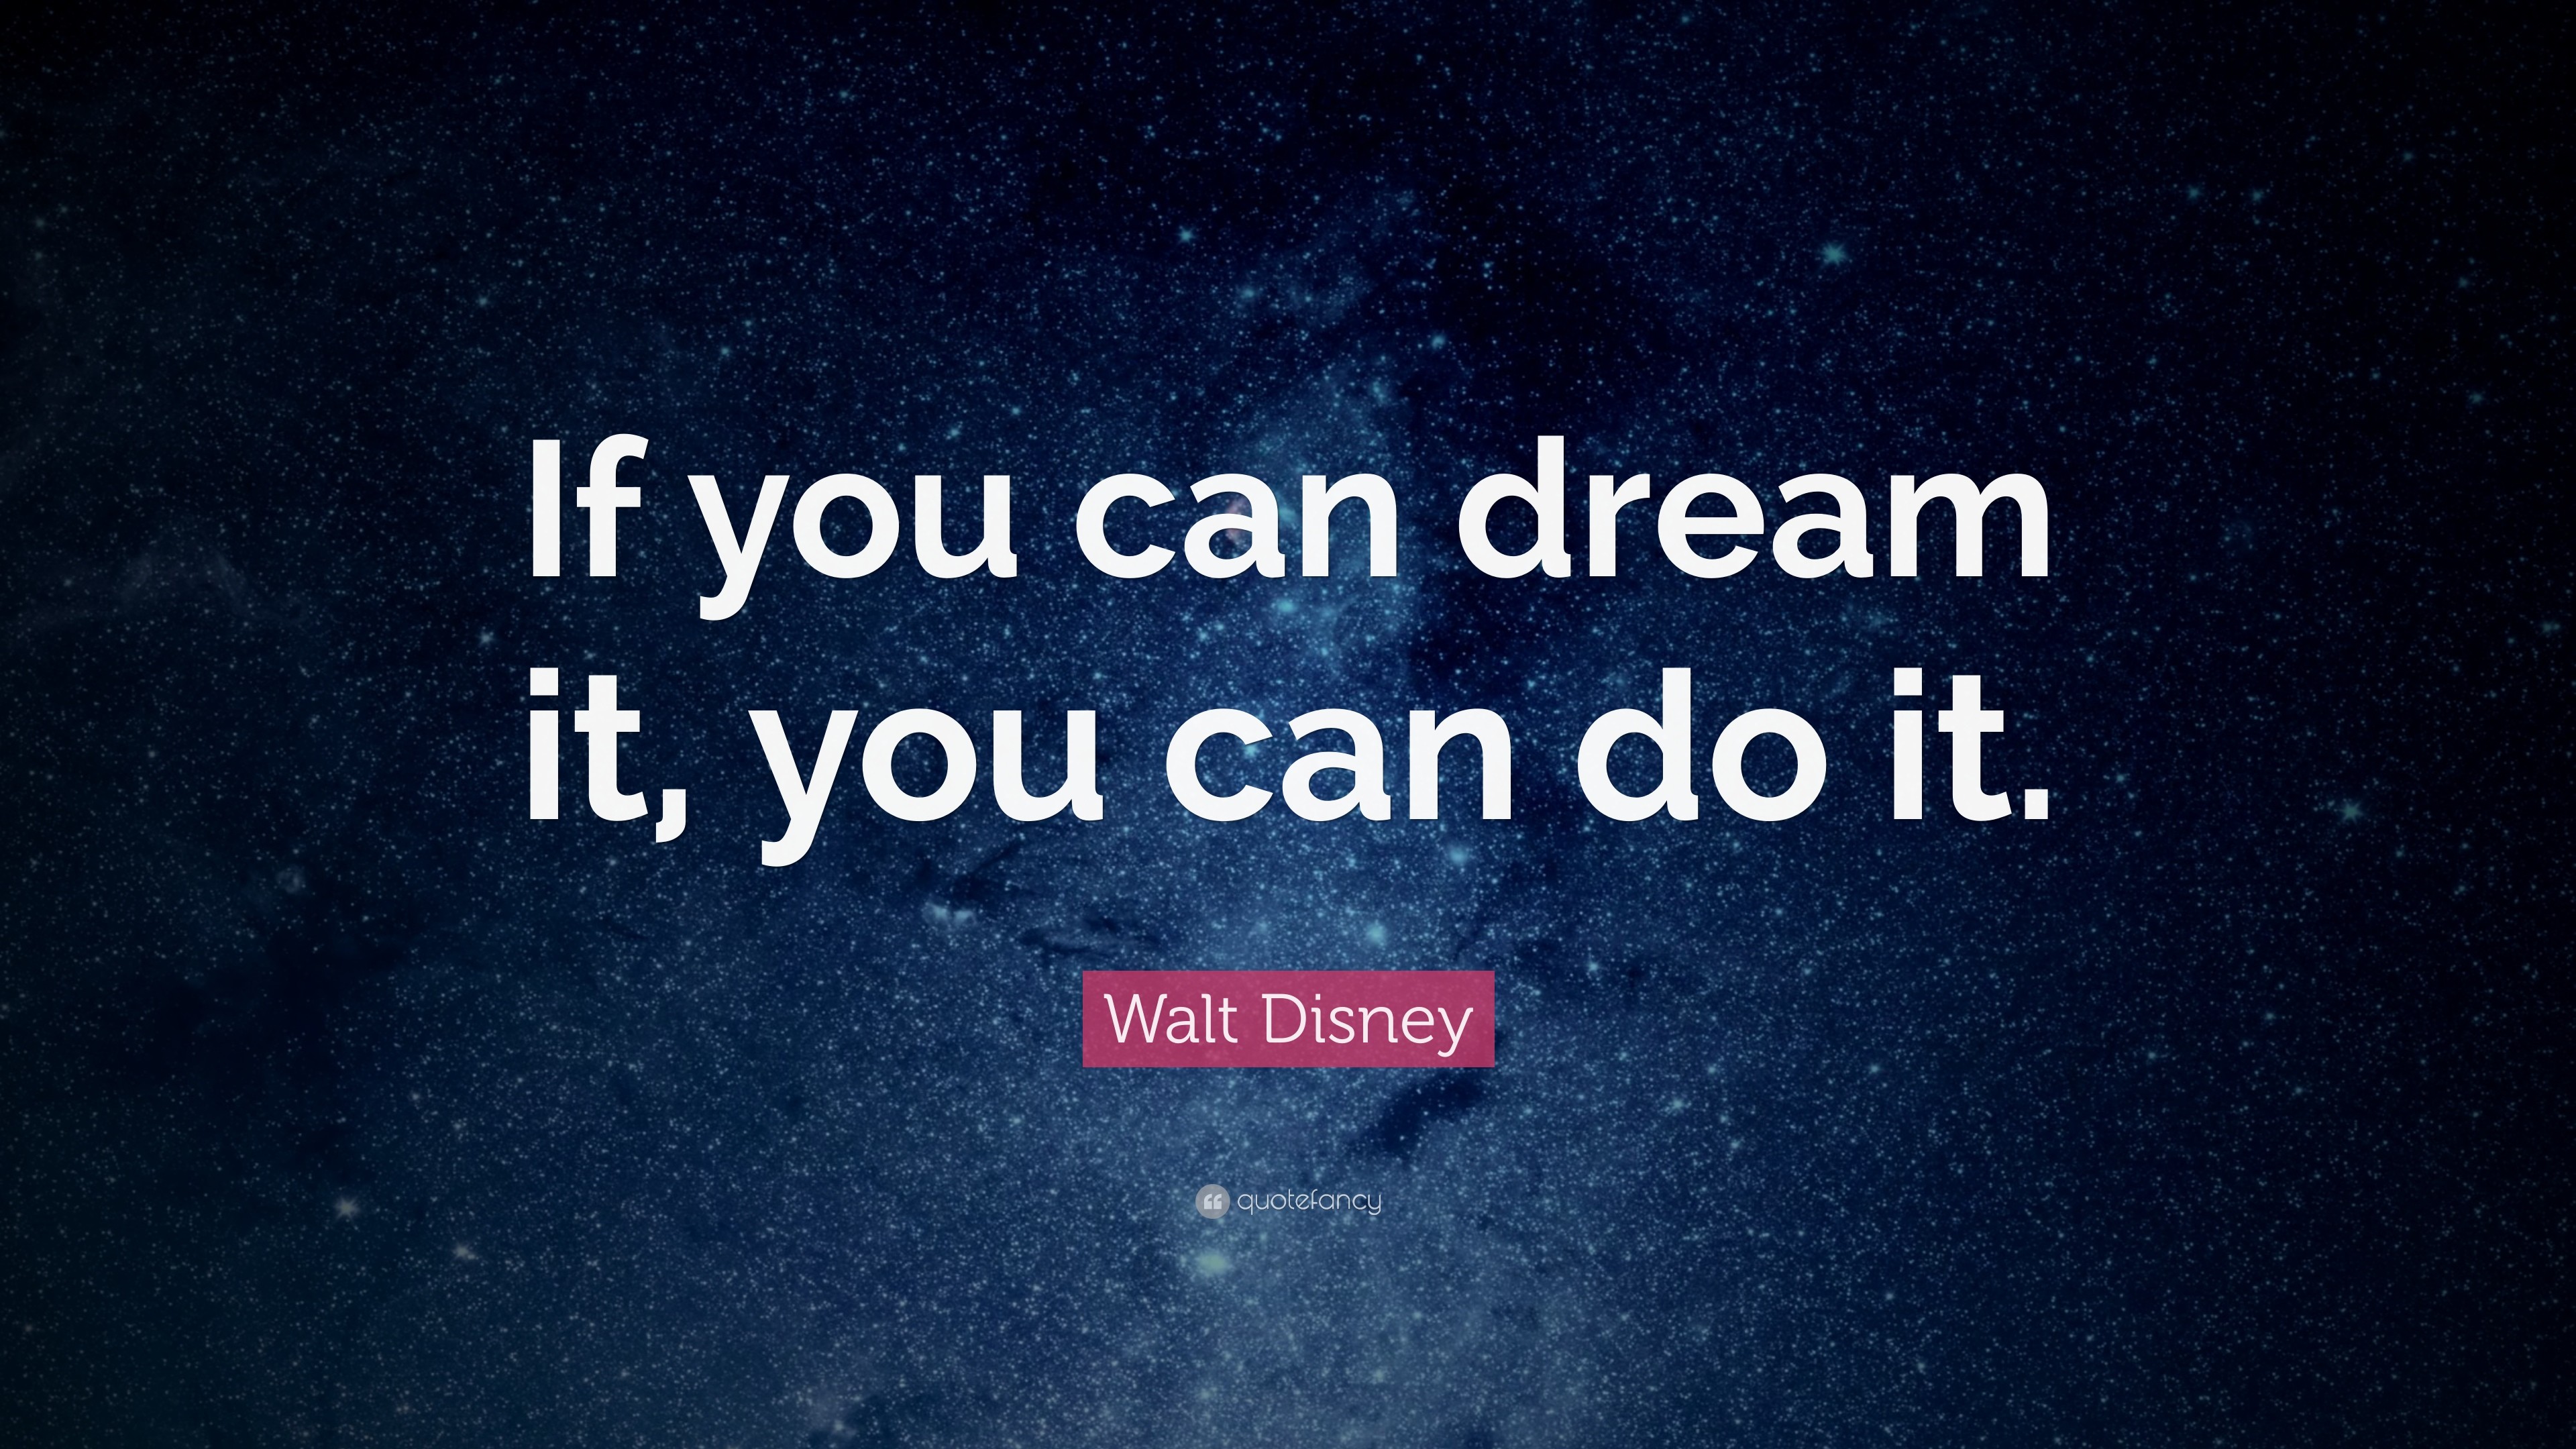 Walt Disney Quote: “If you can dream it, you can do it.